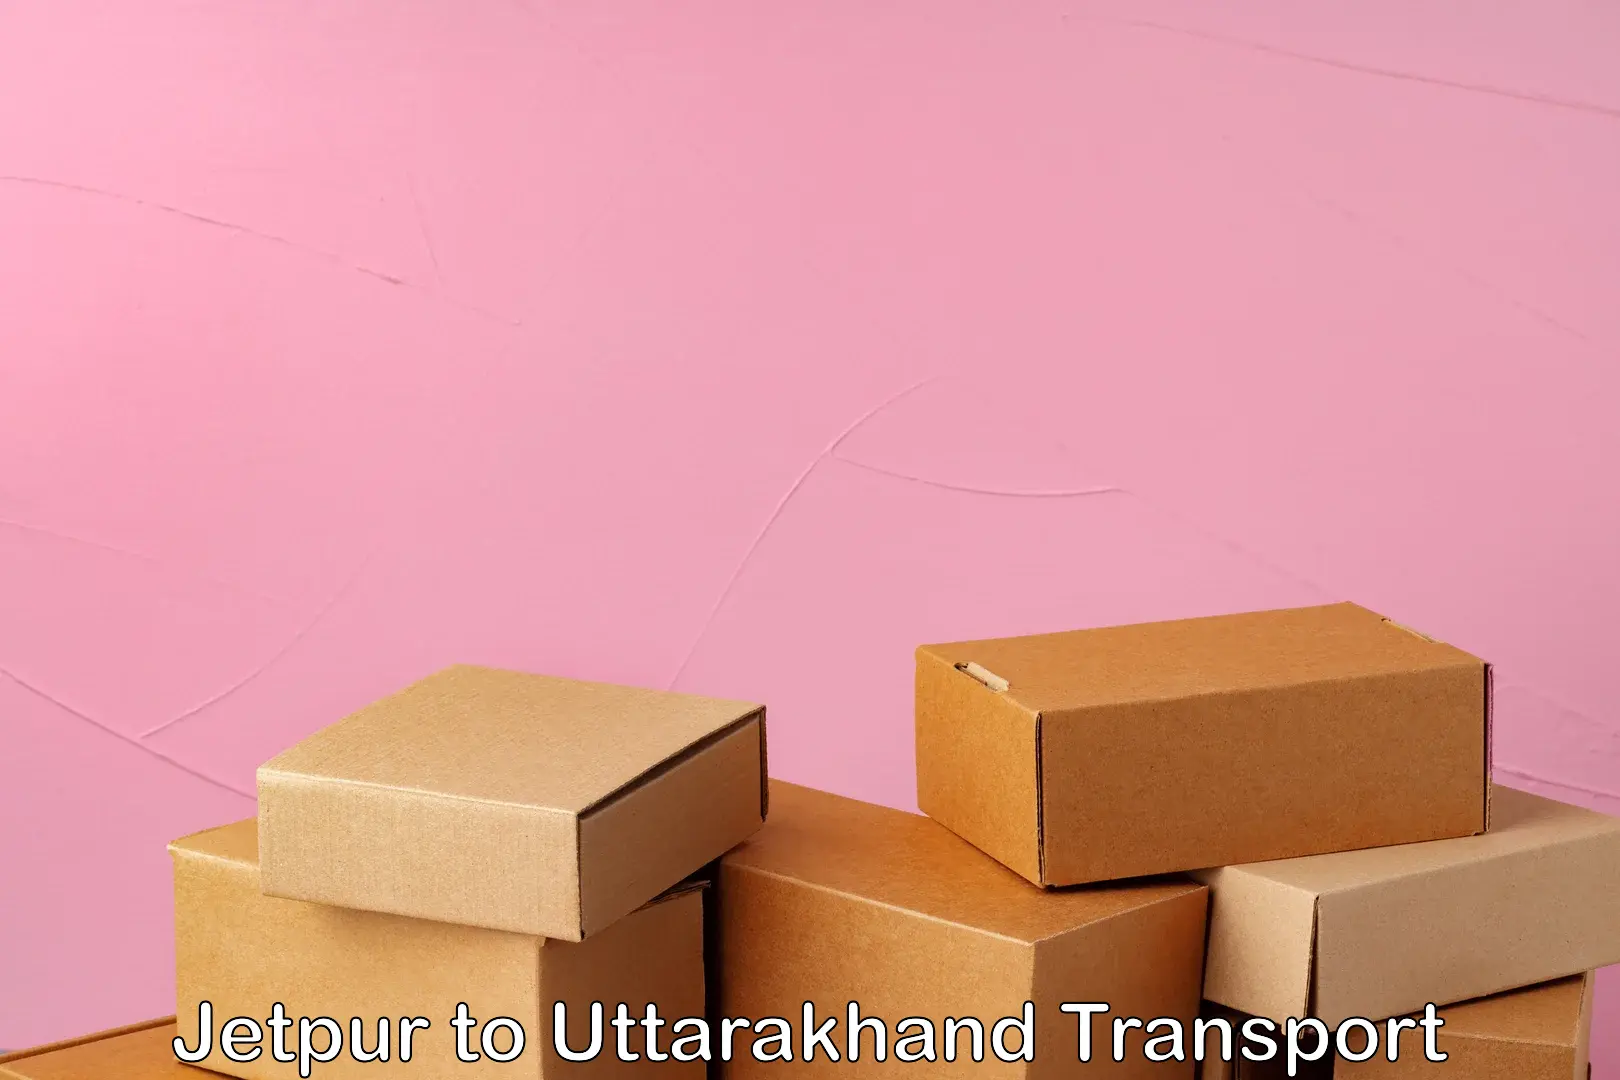 Domestic goods transportation services Jetpur to IIT Roorkee